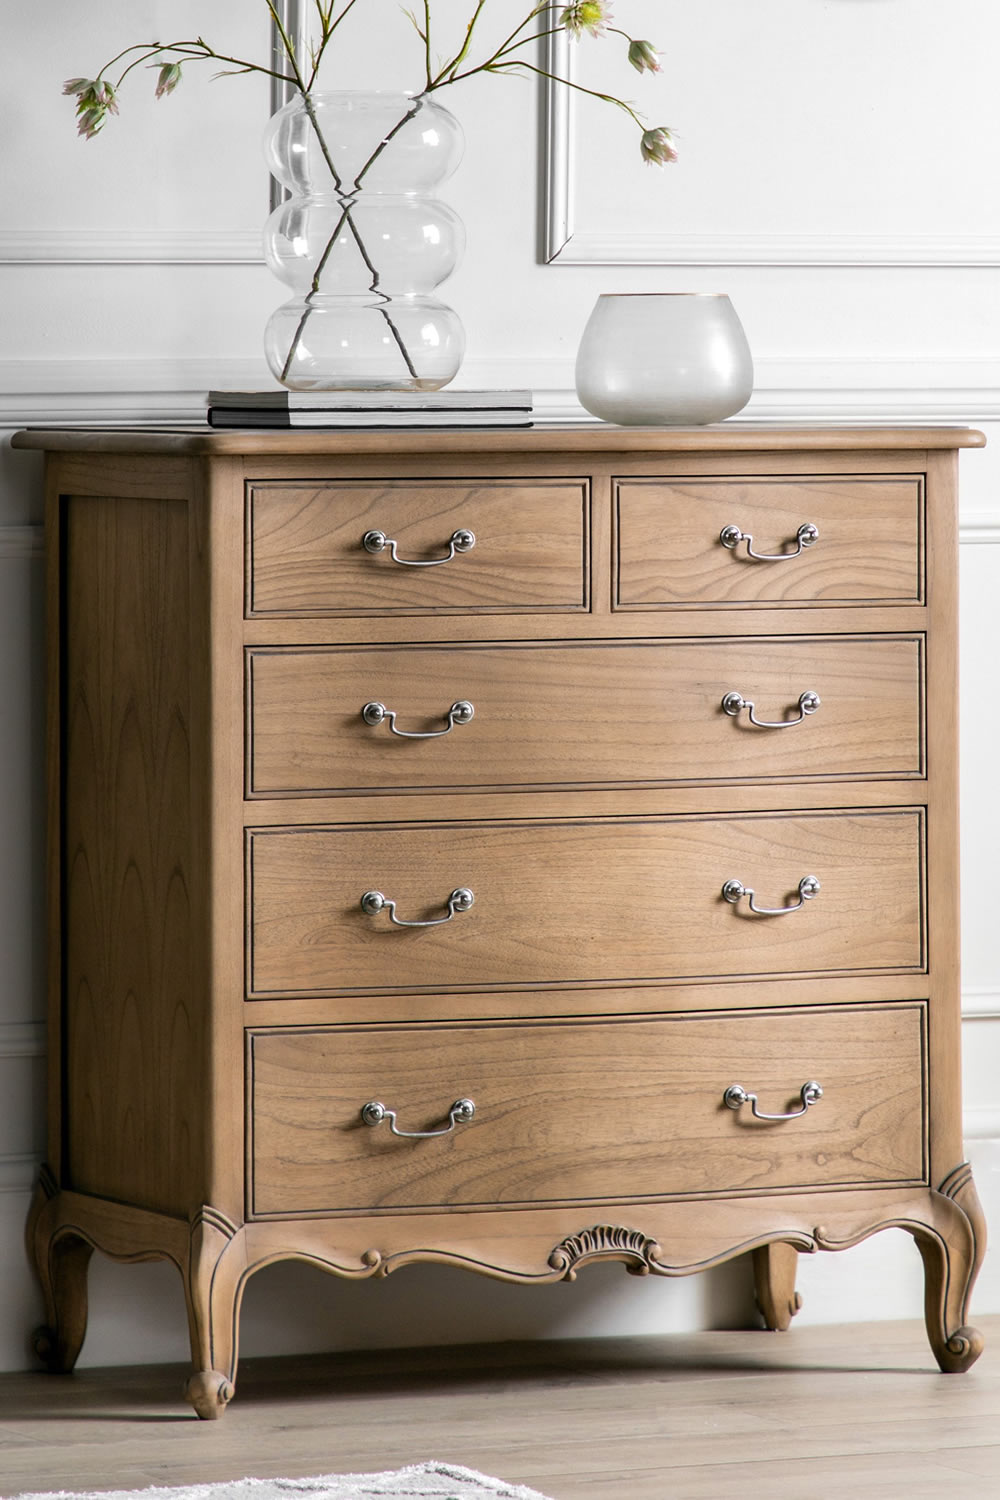 View Chic 5 Drawer Chest Weathered Tall Bedroom Storage Unit With Sliding Drawers Crafted From Solid Mindi Ash Traditional French Furniture Design information